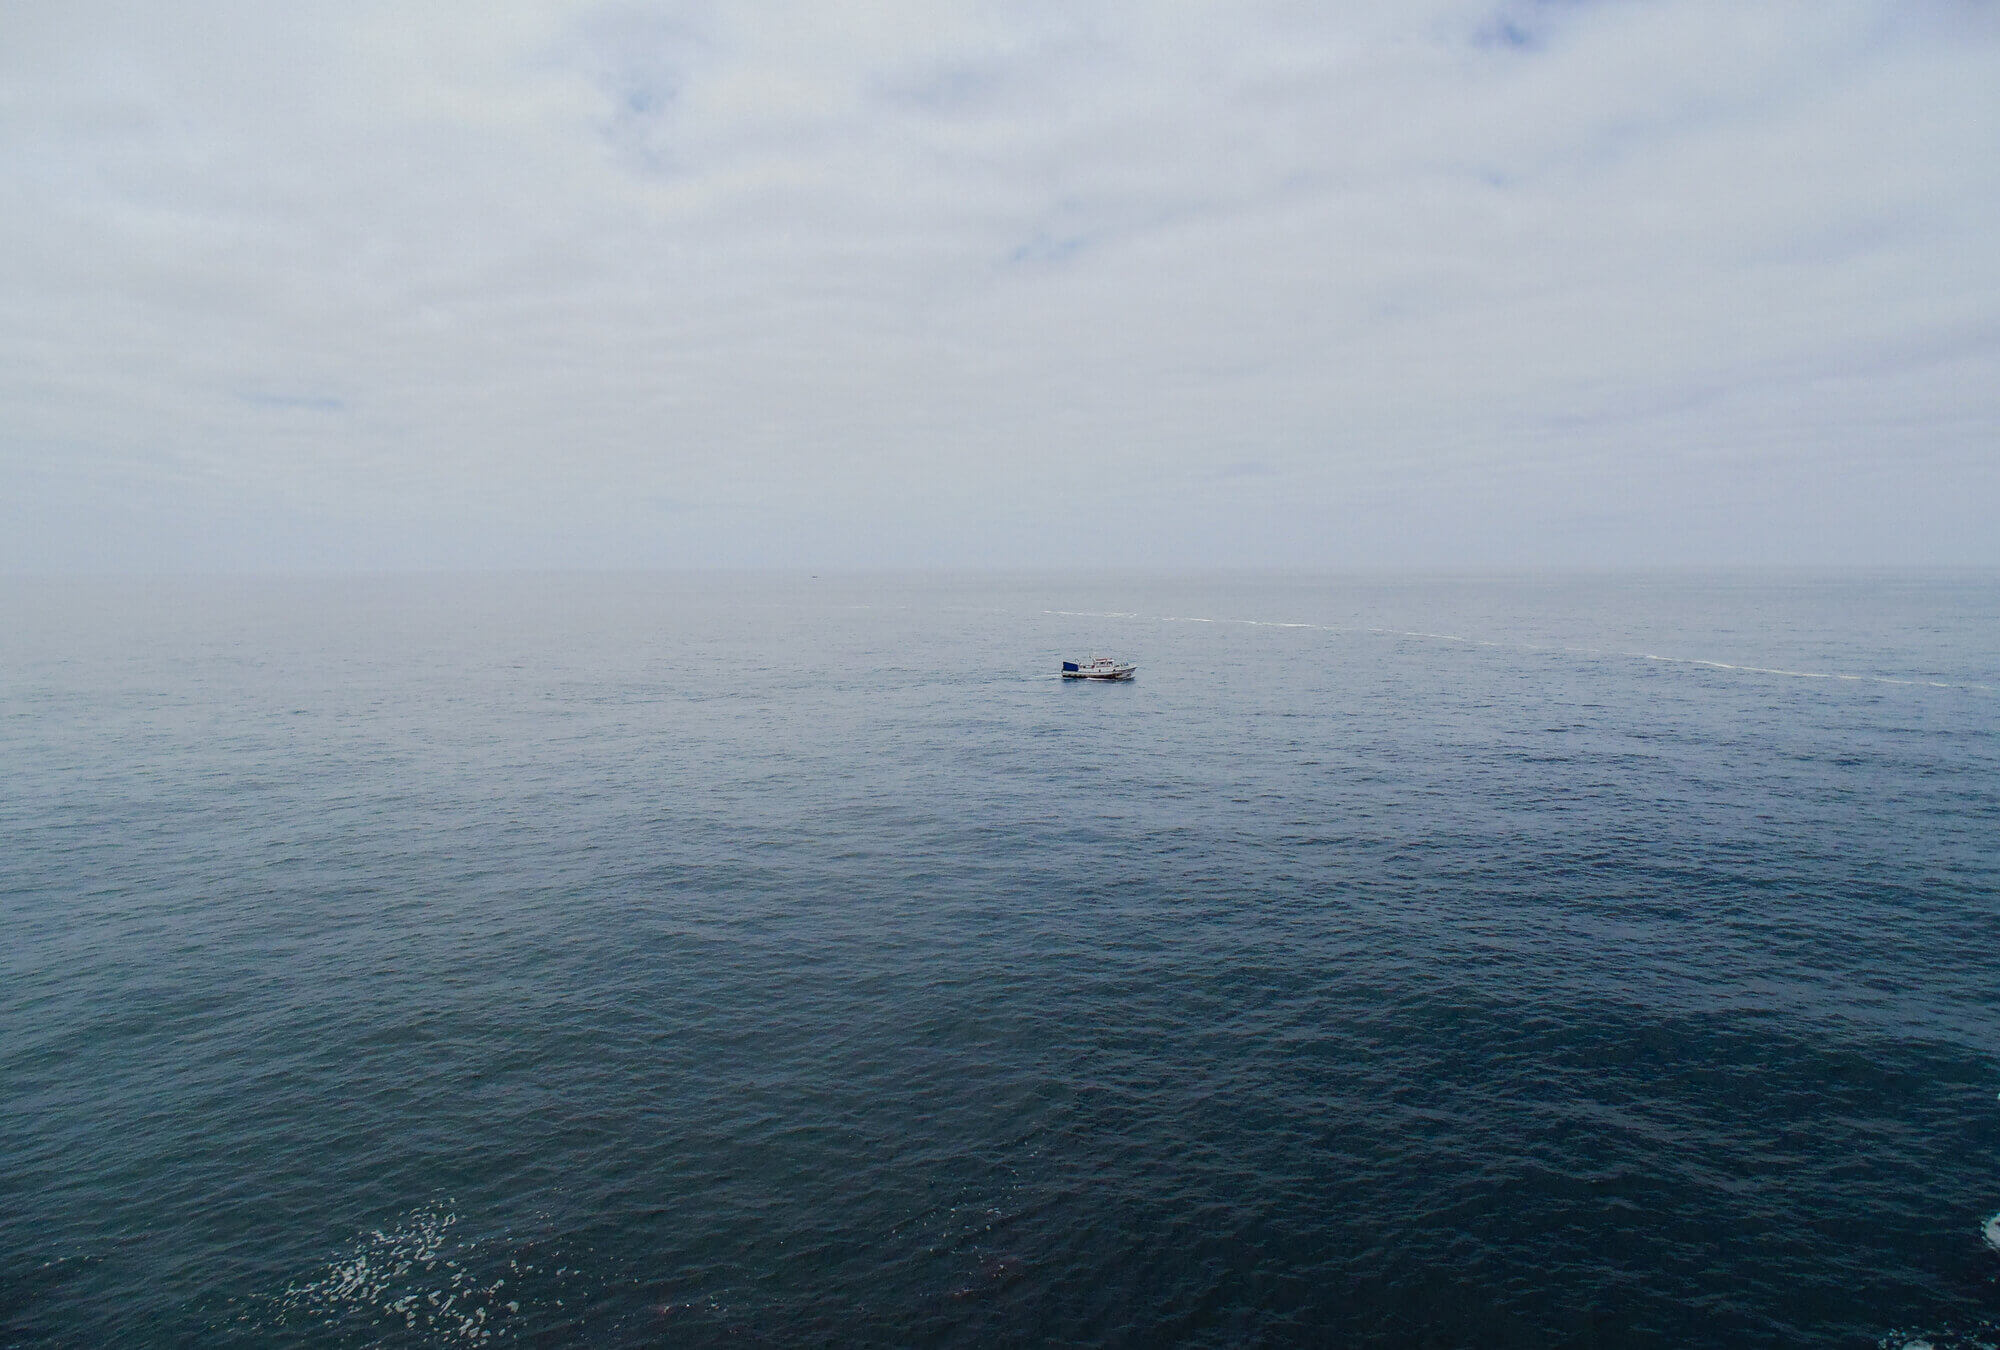 The Coast Guard has already searched a Connecticut-sized area on the the surface of the ocean — but visibility is bad and the submersible could have floated far.